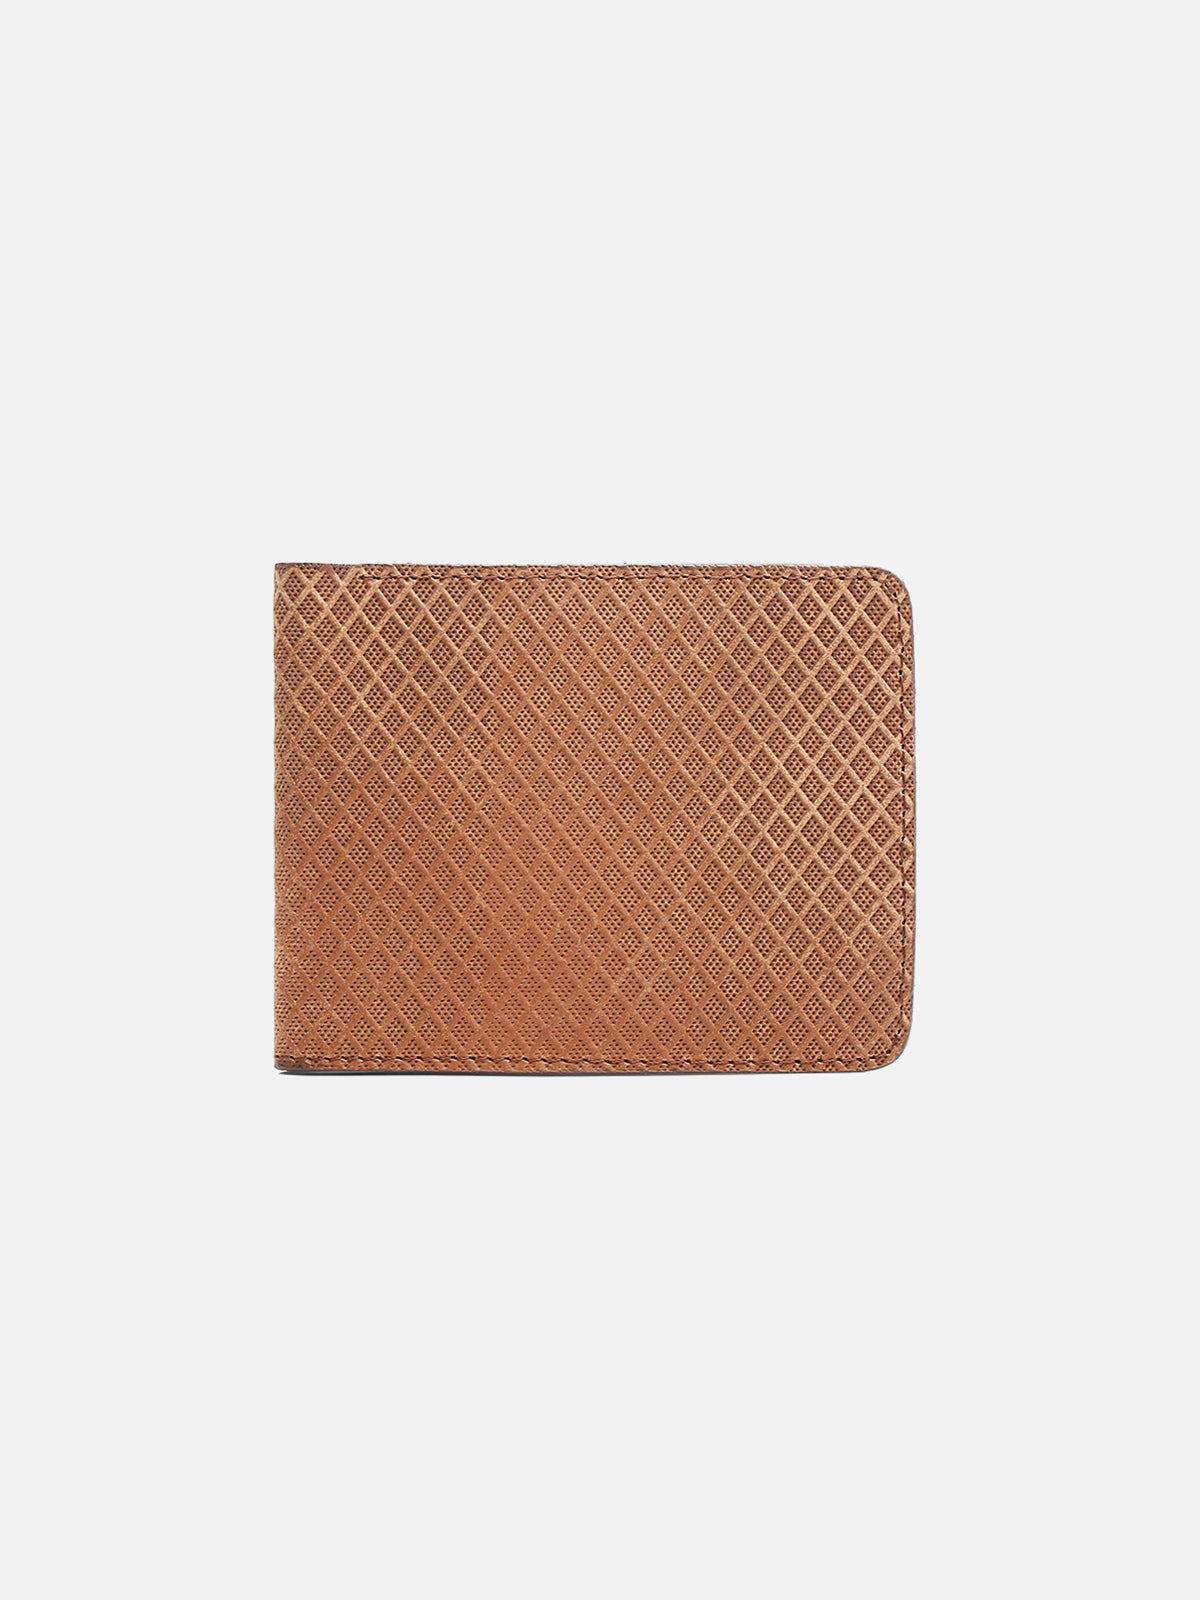 Brown Leather Wallet - FAMW24-001